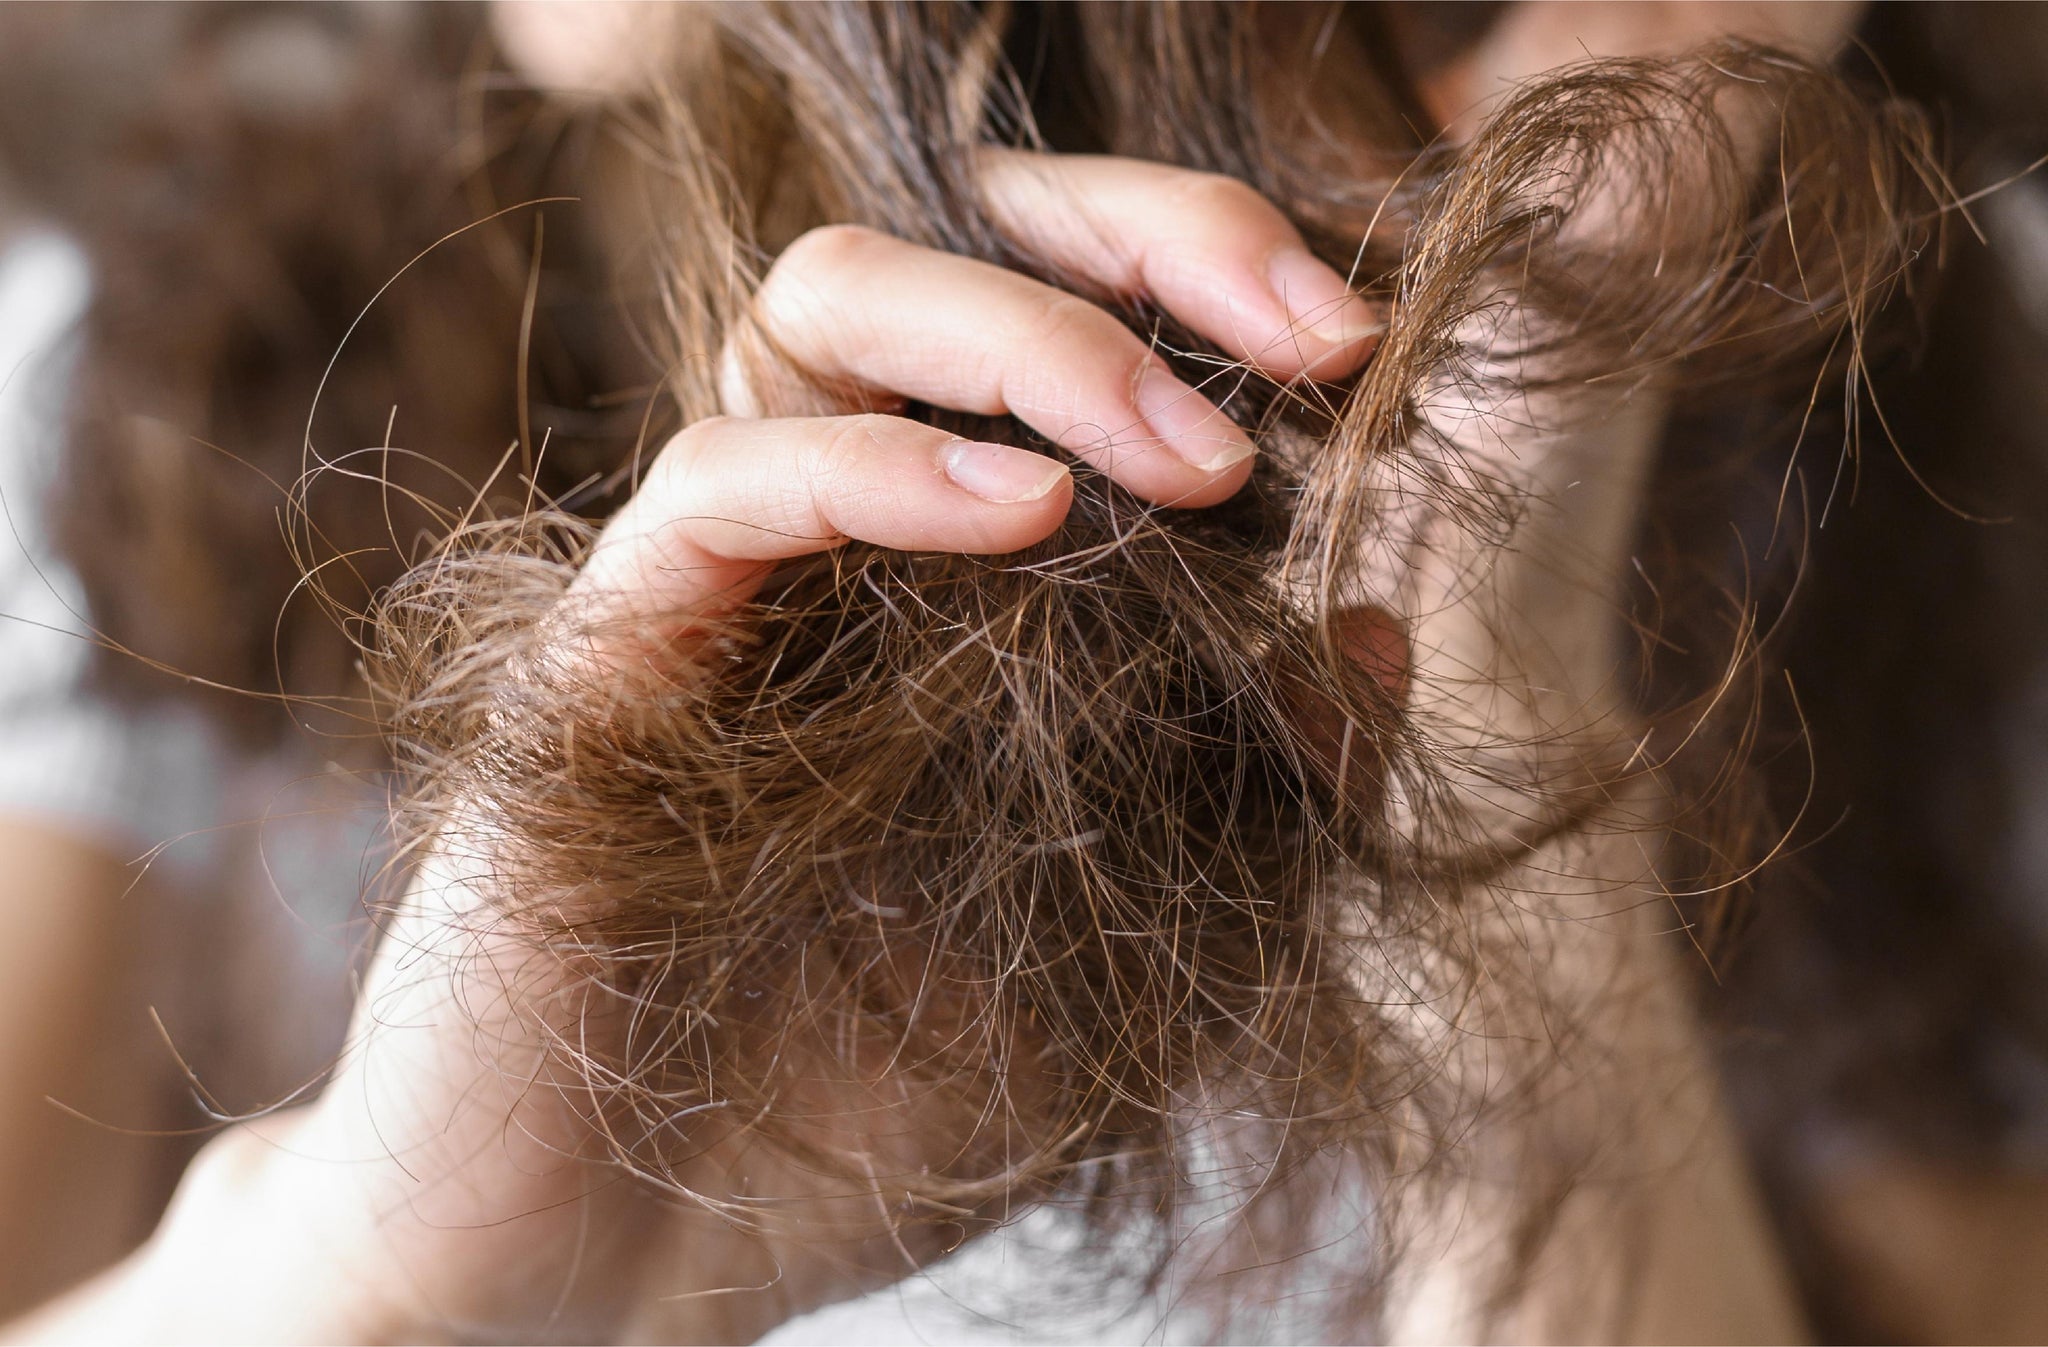 Common Monsoon Hair Problems and How You Can Fix Them